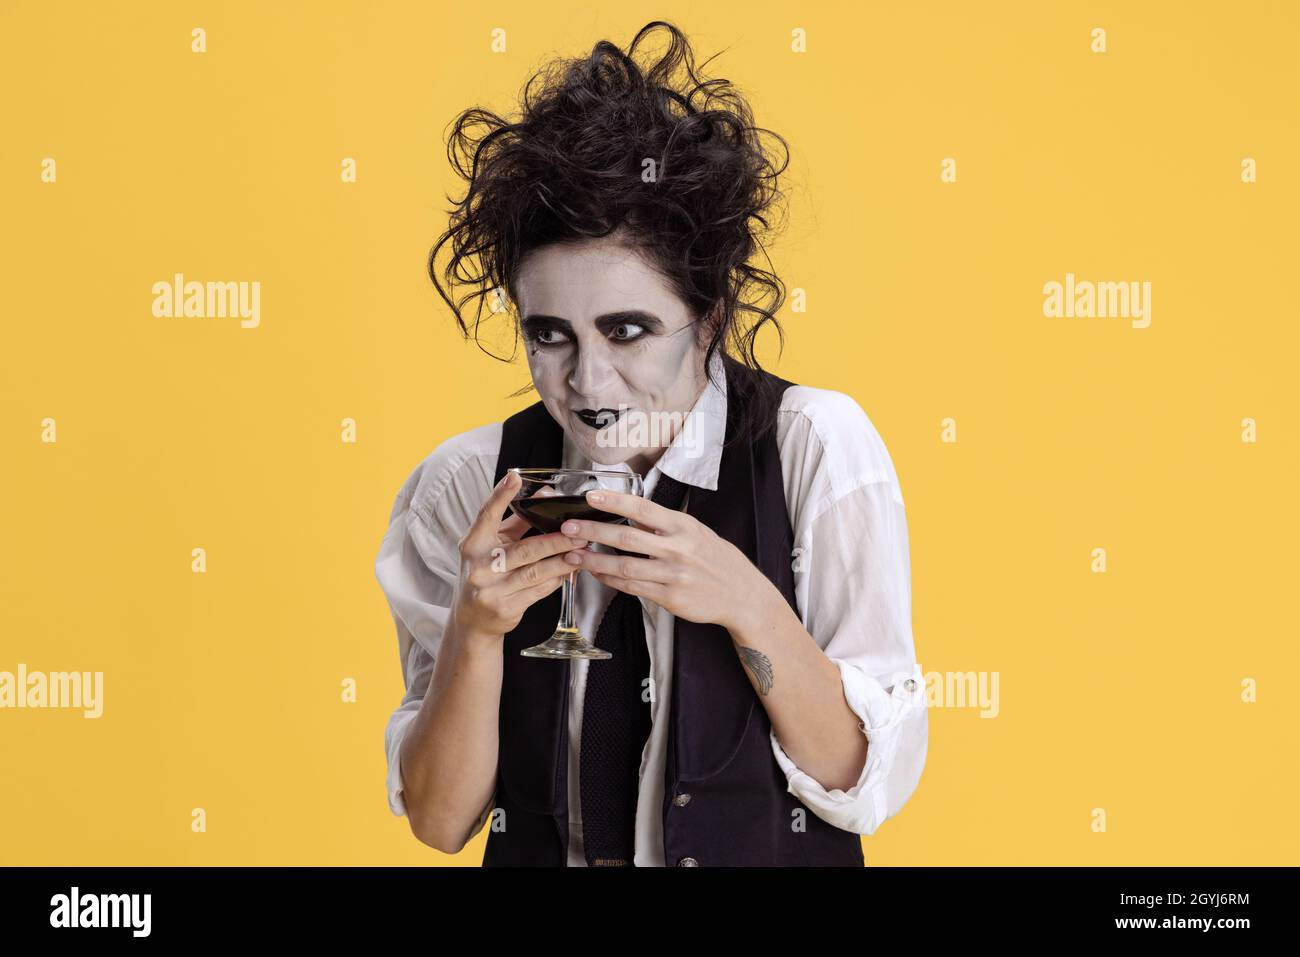 Portrait of woman with messy hair and creepy makeup having viperous facial expression isolated on yellow background. Halloween party Stock Photo